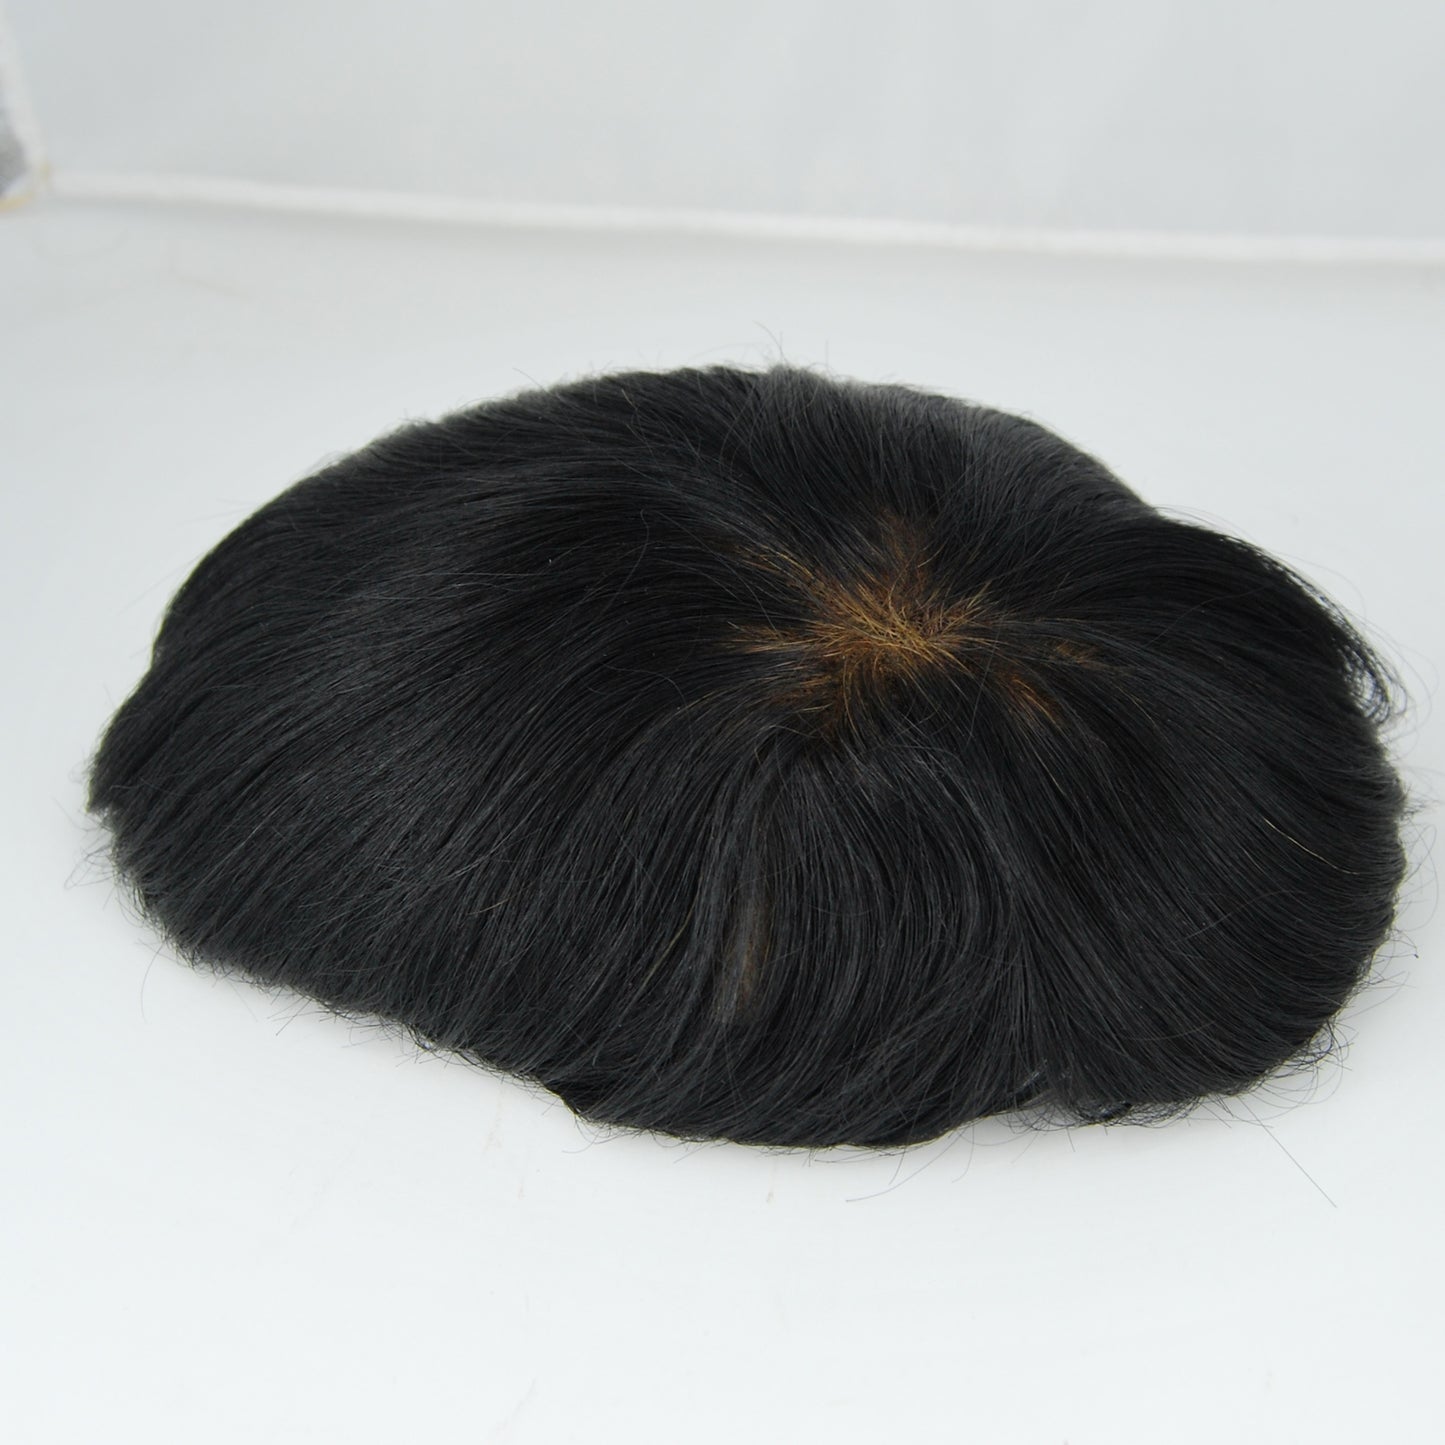 Clearance #1 jet black toupee 9x6.5" French with PU around narrow lace front 9x7" human hair system for men